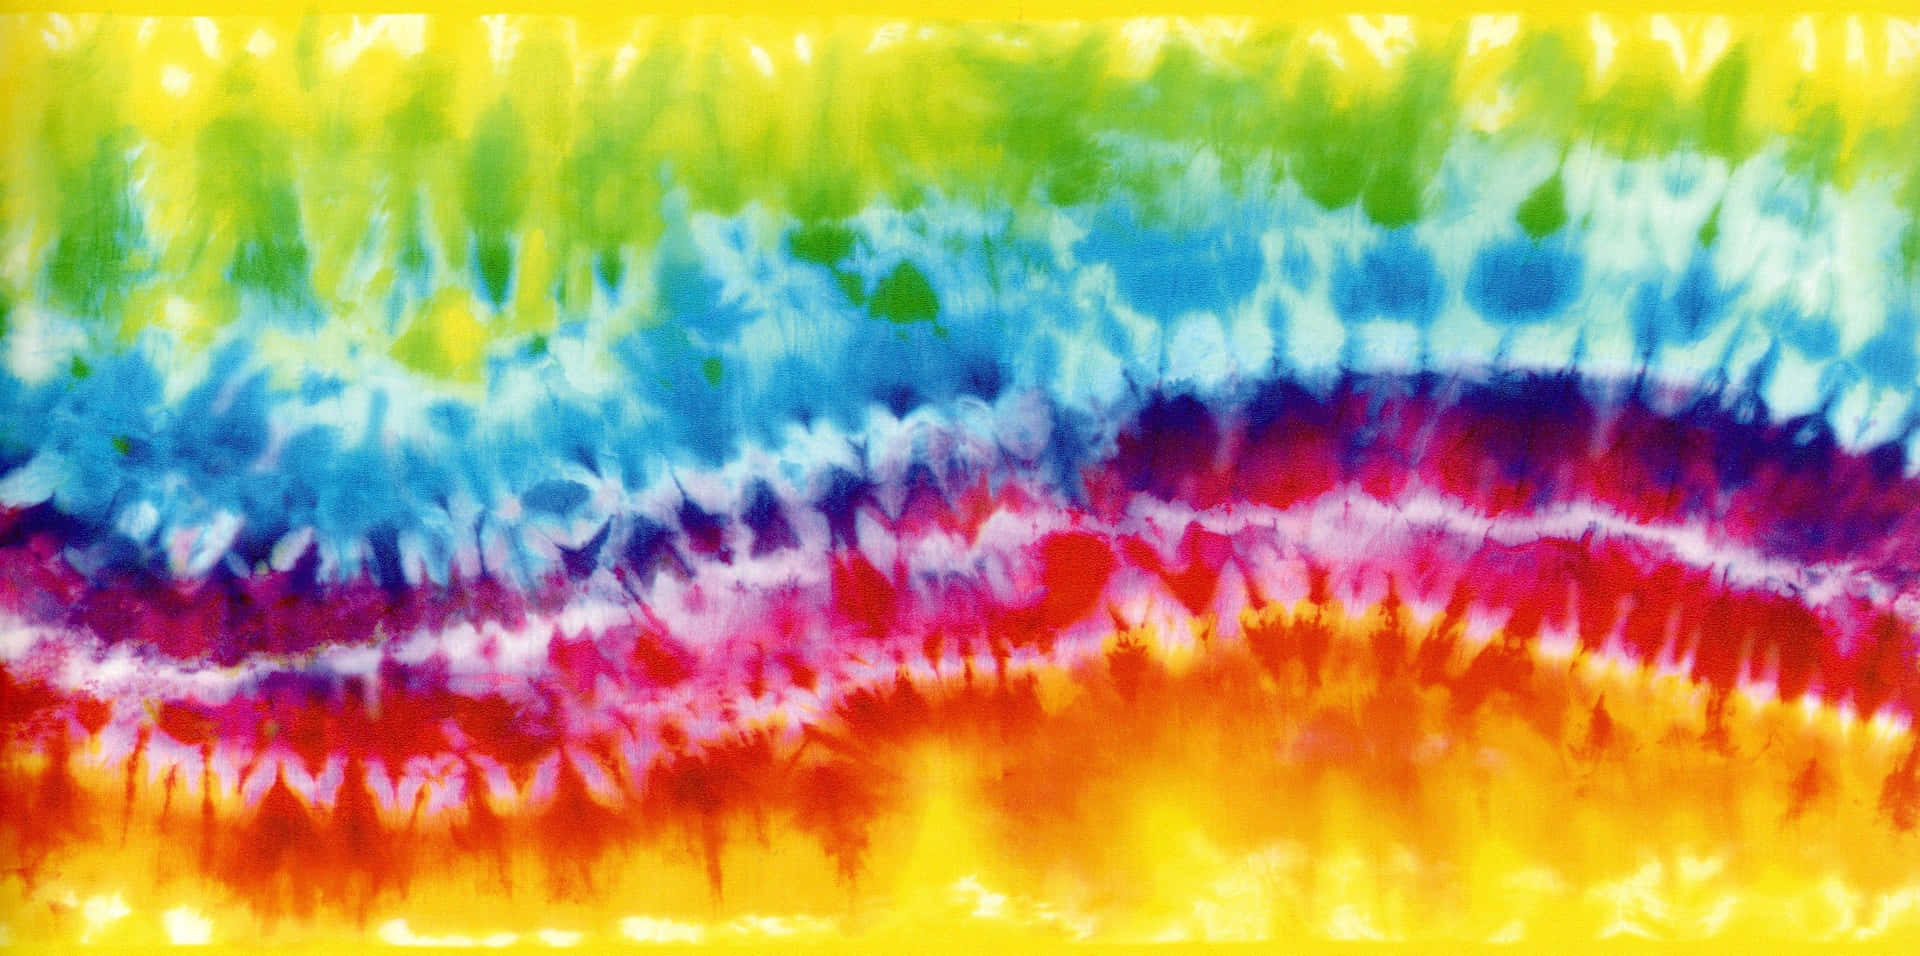 Vibrant Explosion Of Colors In A Swirled Tie Dye Pattern